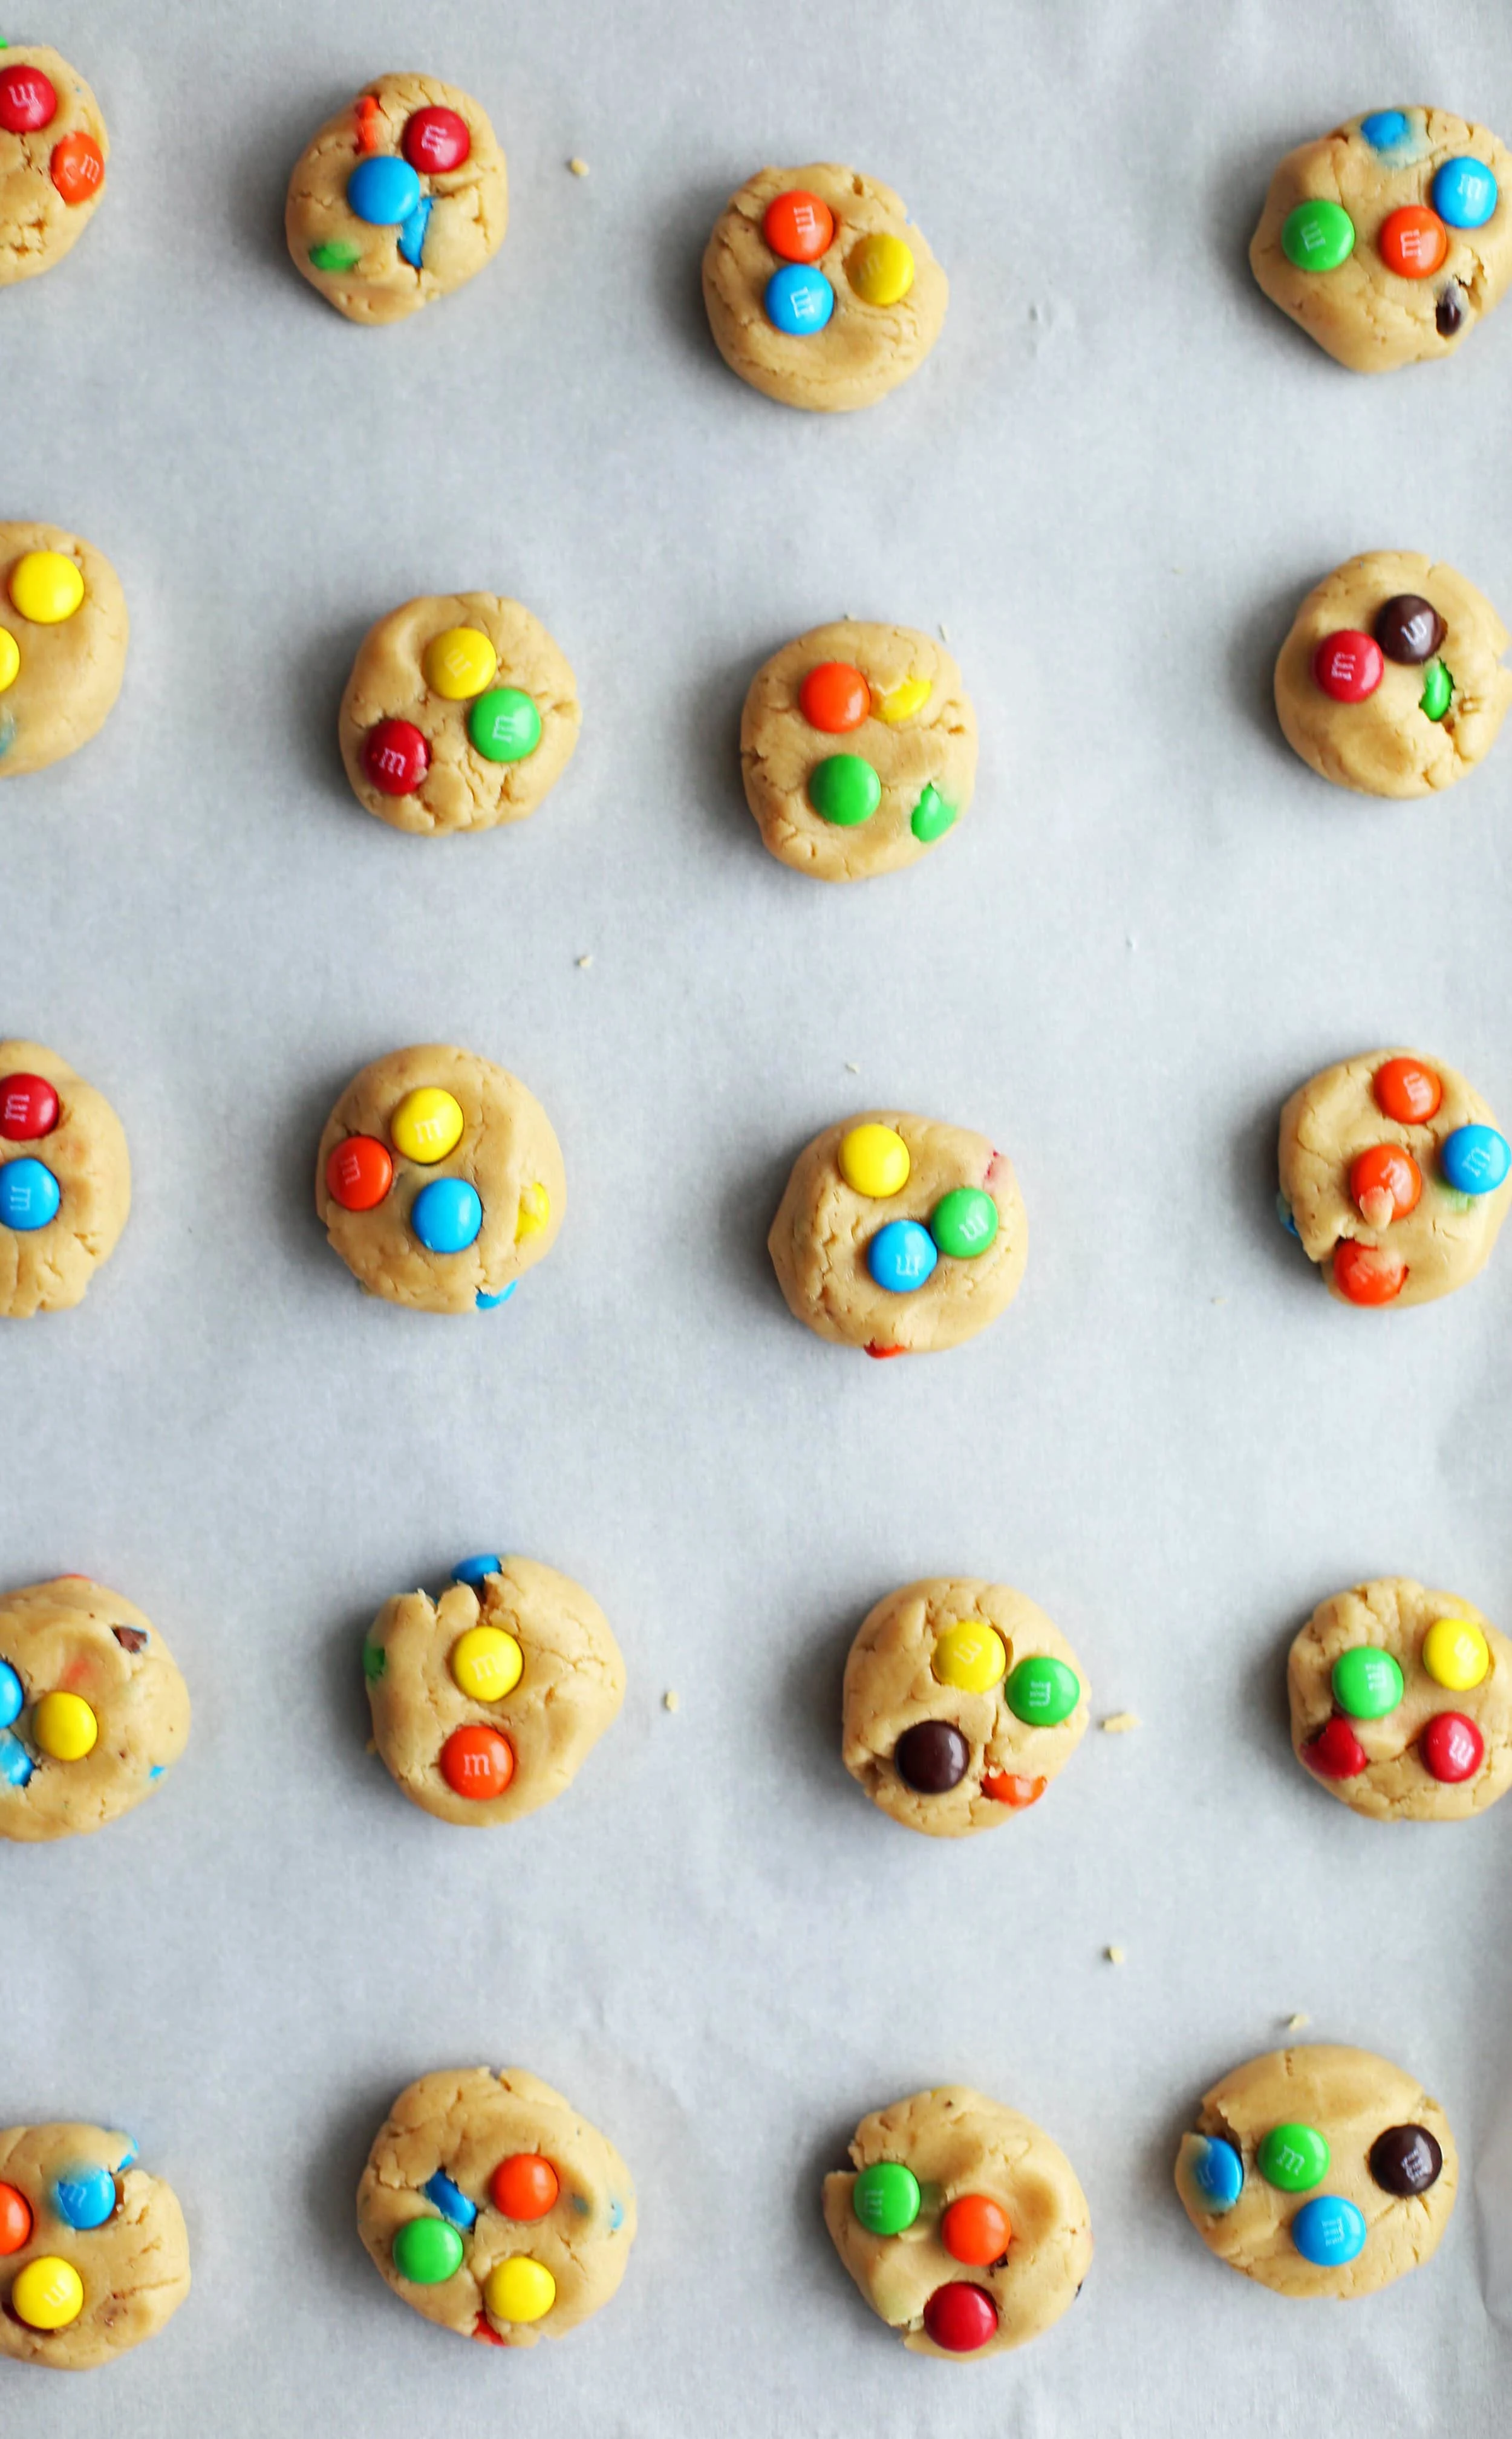 Cookie dough shaped into flattened one inch discs with colourful M&M's pressed on top.